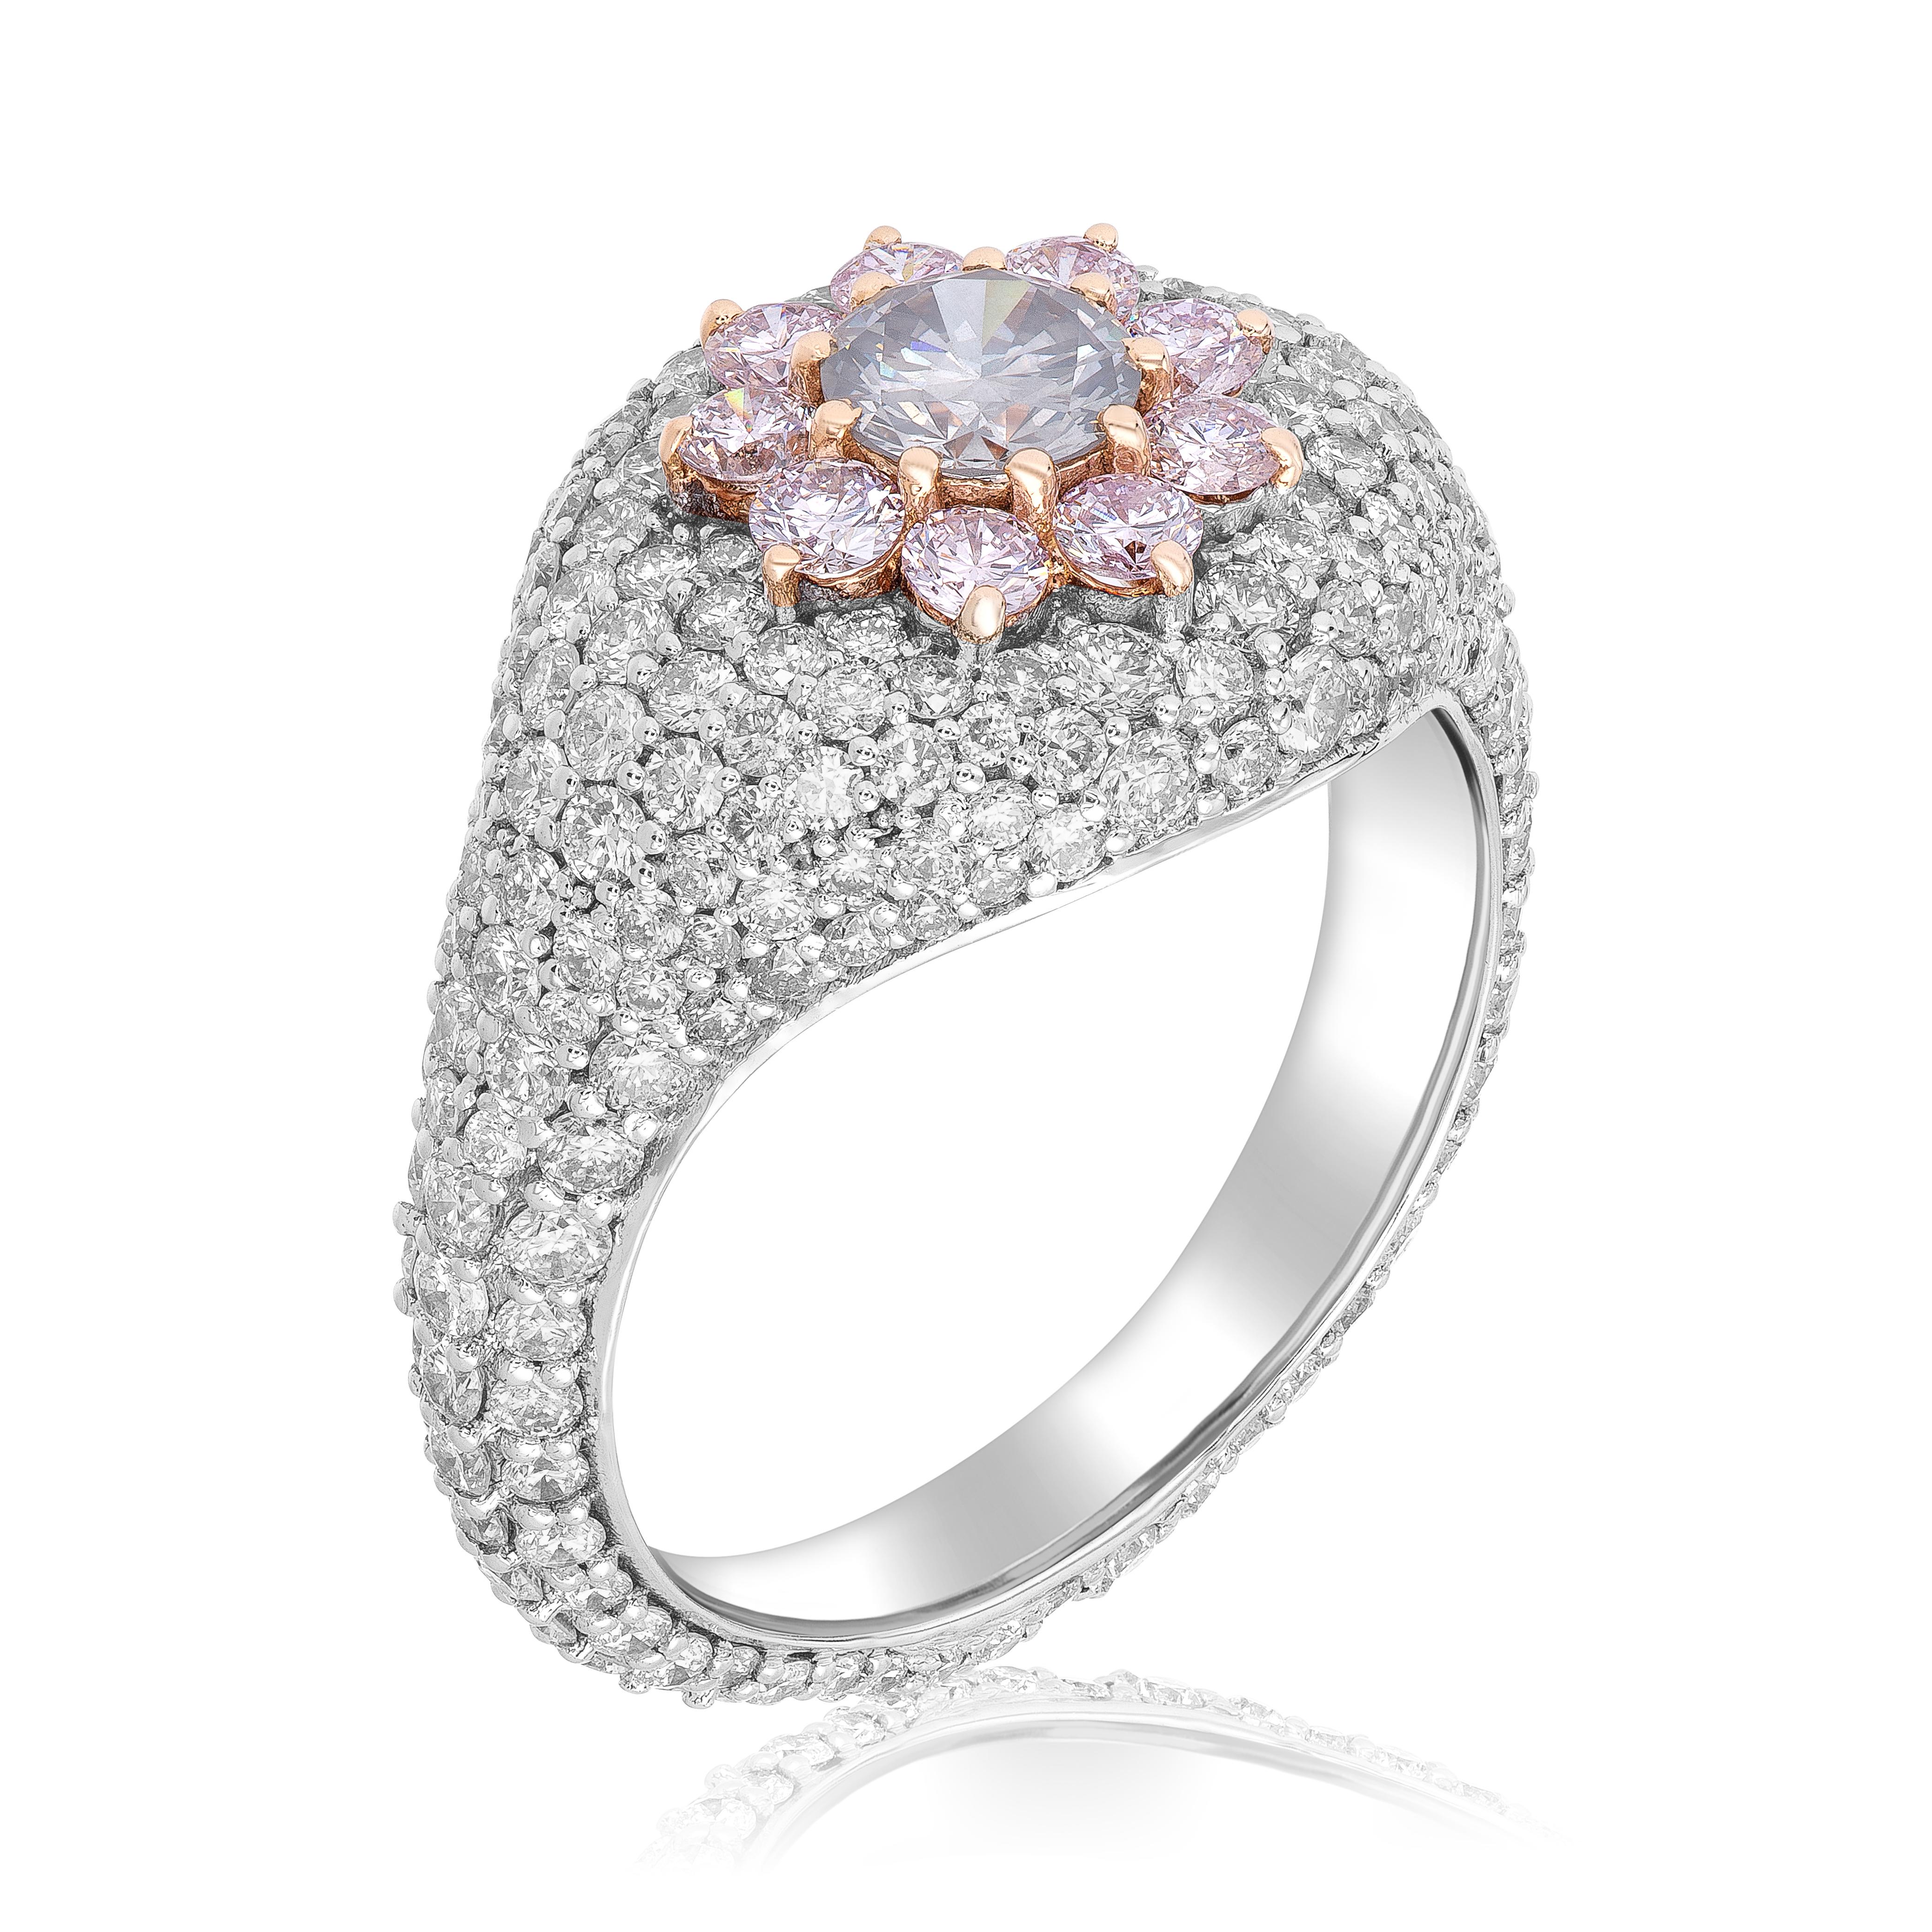 Contemporary Fashion Ring Featuring a Fancy Grayish Green Round & Pink Diamond 18k Gold Ring